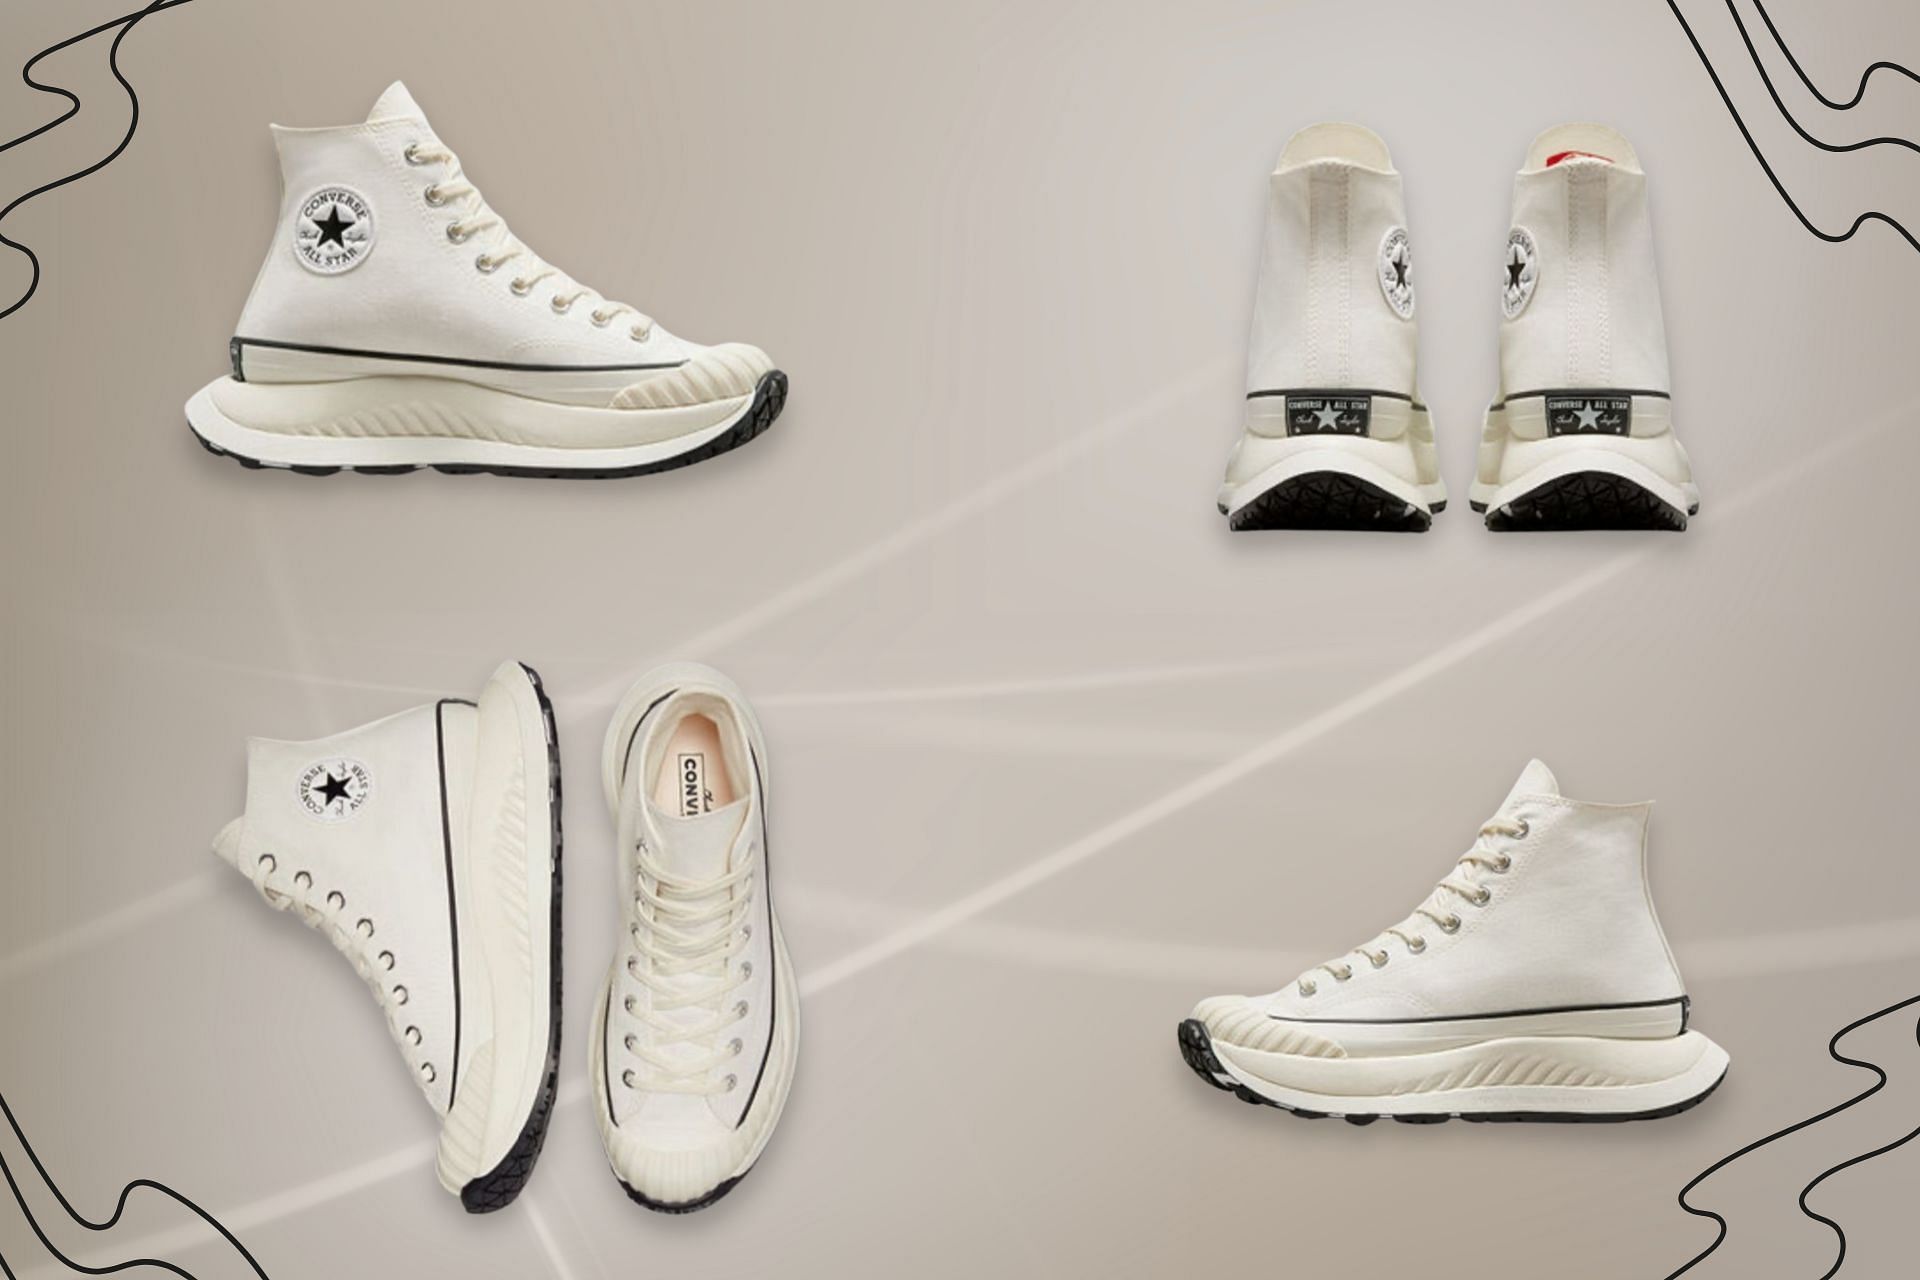 Take a closer look at the Vintage white Chuck 70 AT-CX shoes (Image via Sportskeeda)